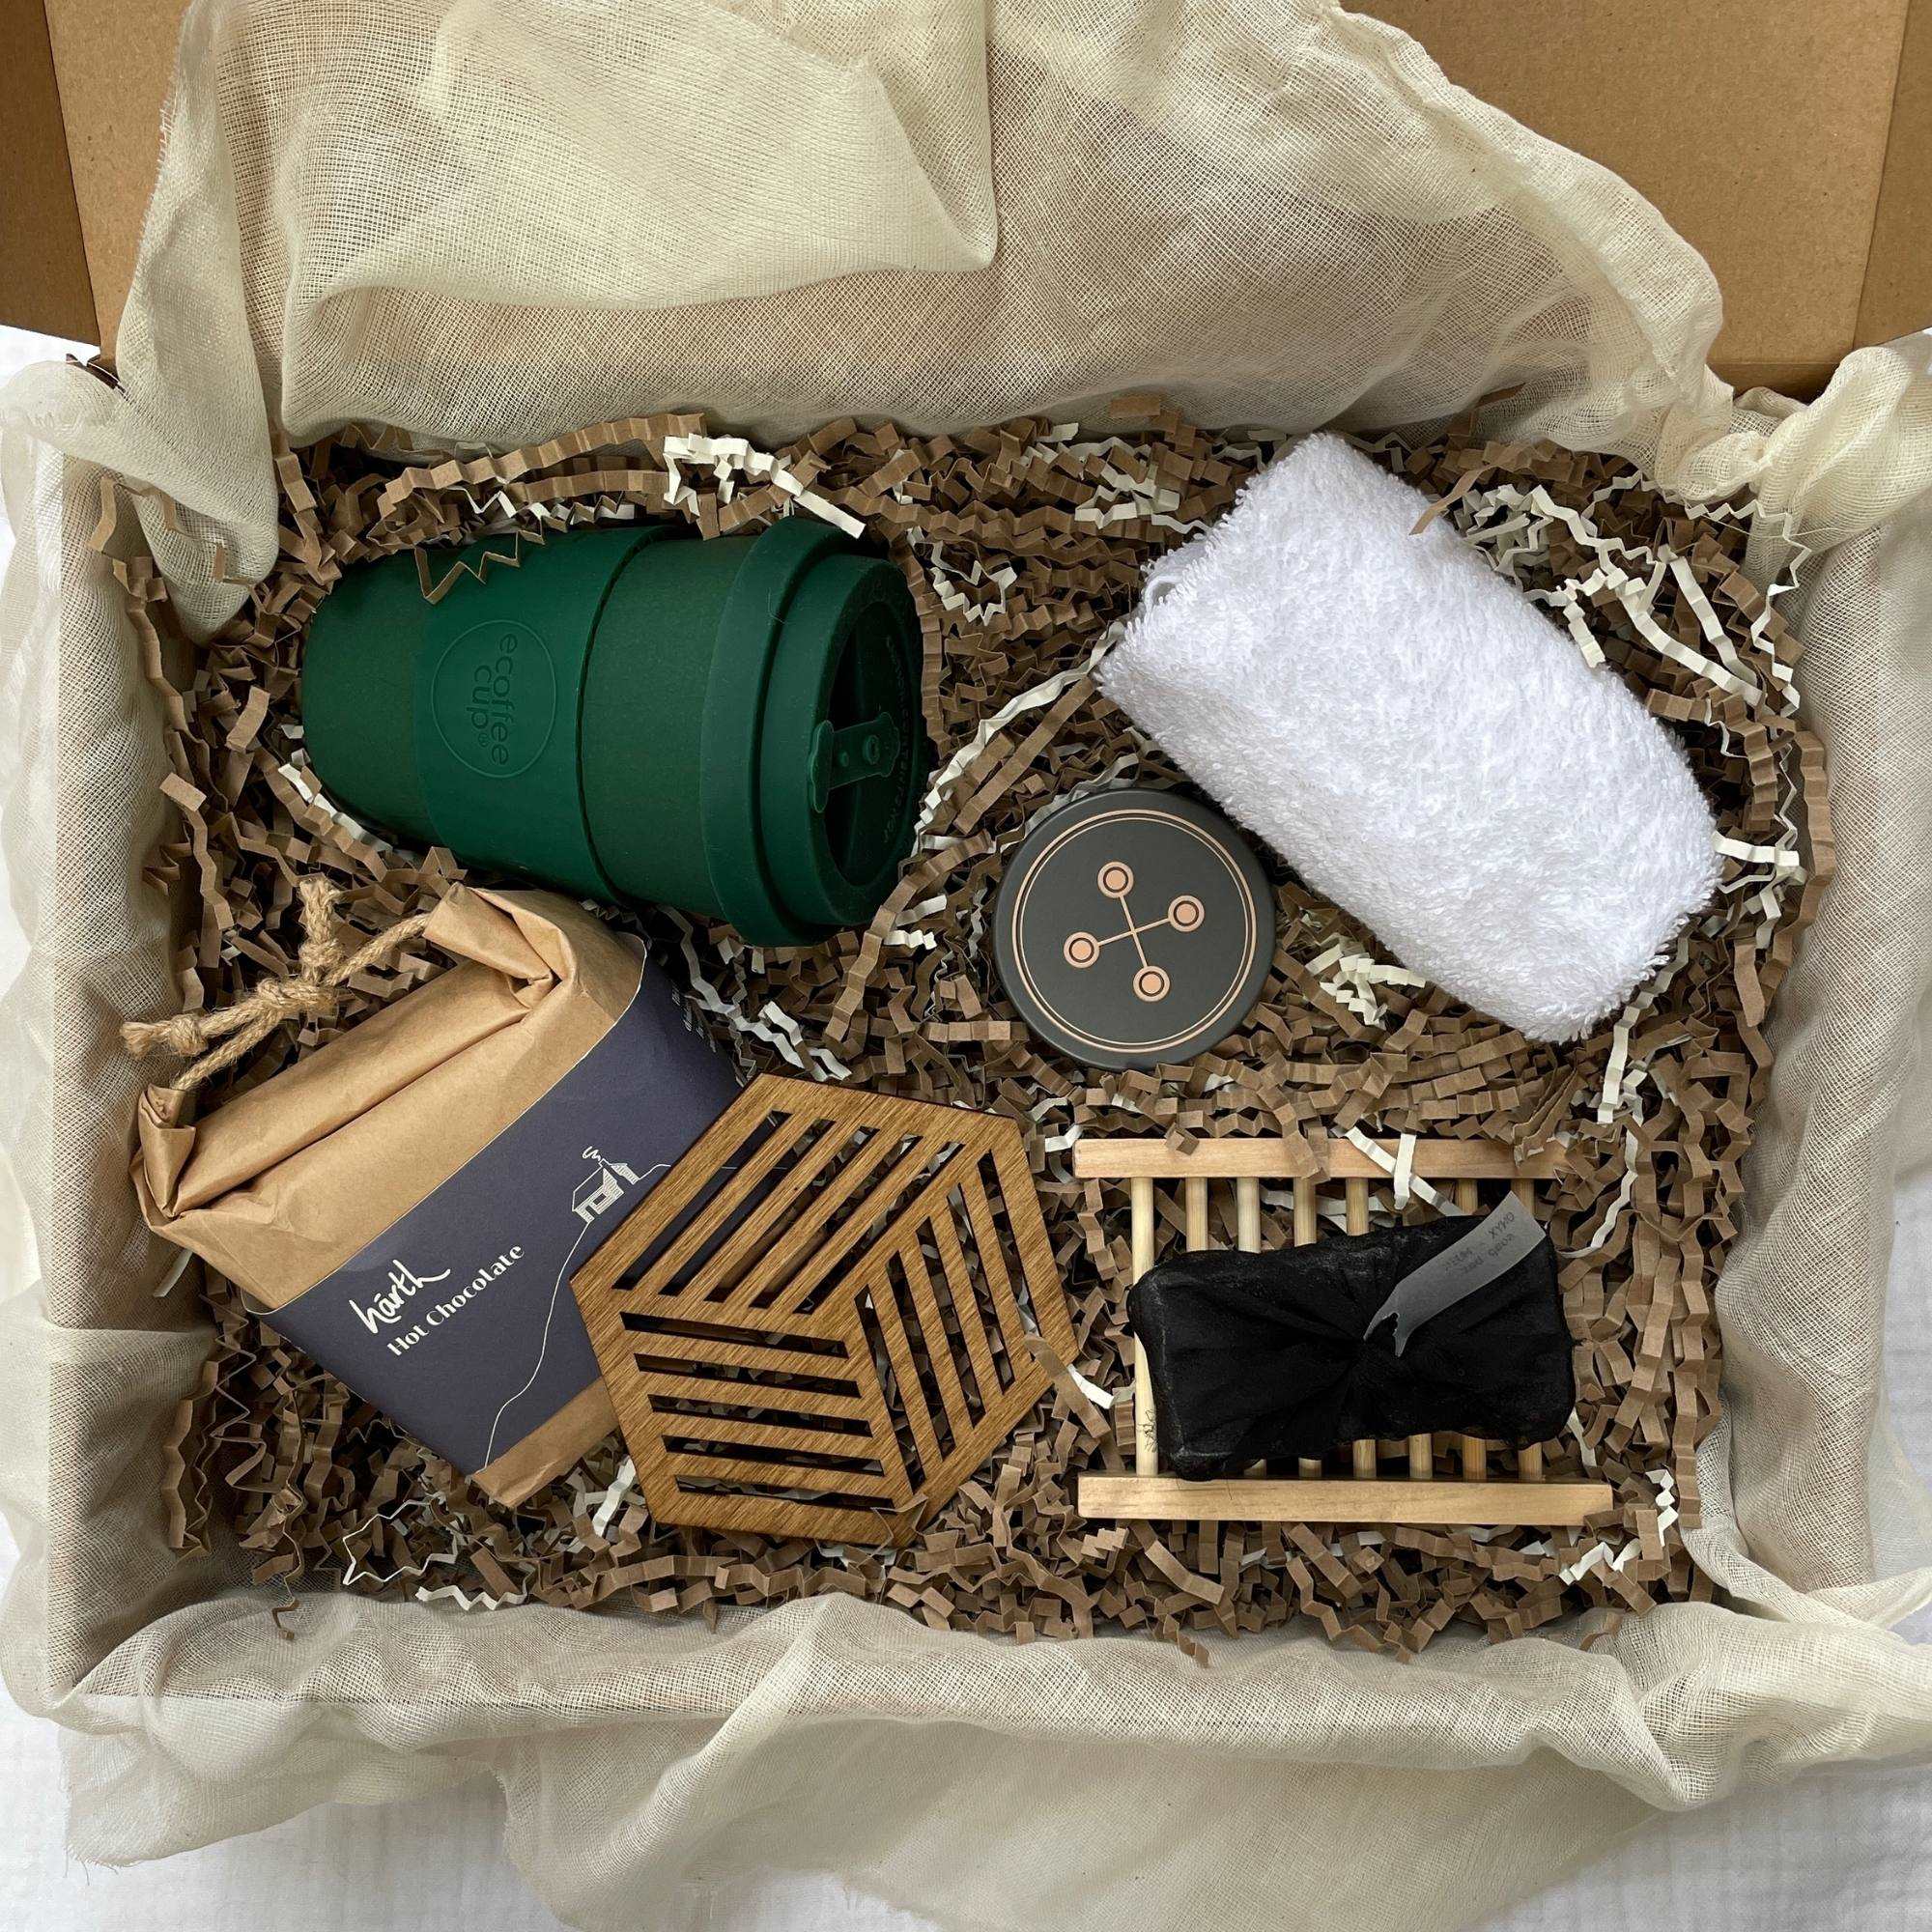 Photo of products inside a cardboard gift box. A deep evergreen eCoffee Cup, 1 geometric hexagonal birchwood coaster, a rectangular brown paper package of hot chocolate, white face cloth, small tin of XO Balm, black soap bar and bamboo tray sit on recycled brown paper stuffing inside organic muslin fabric.